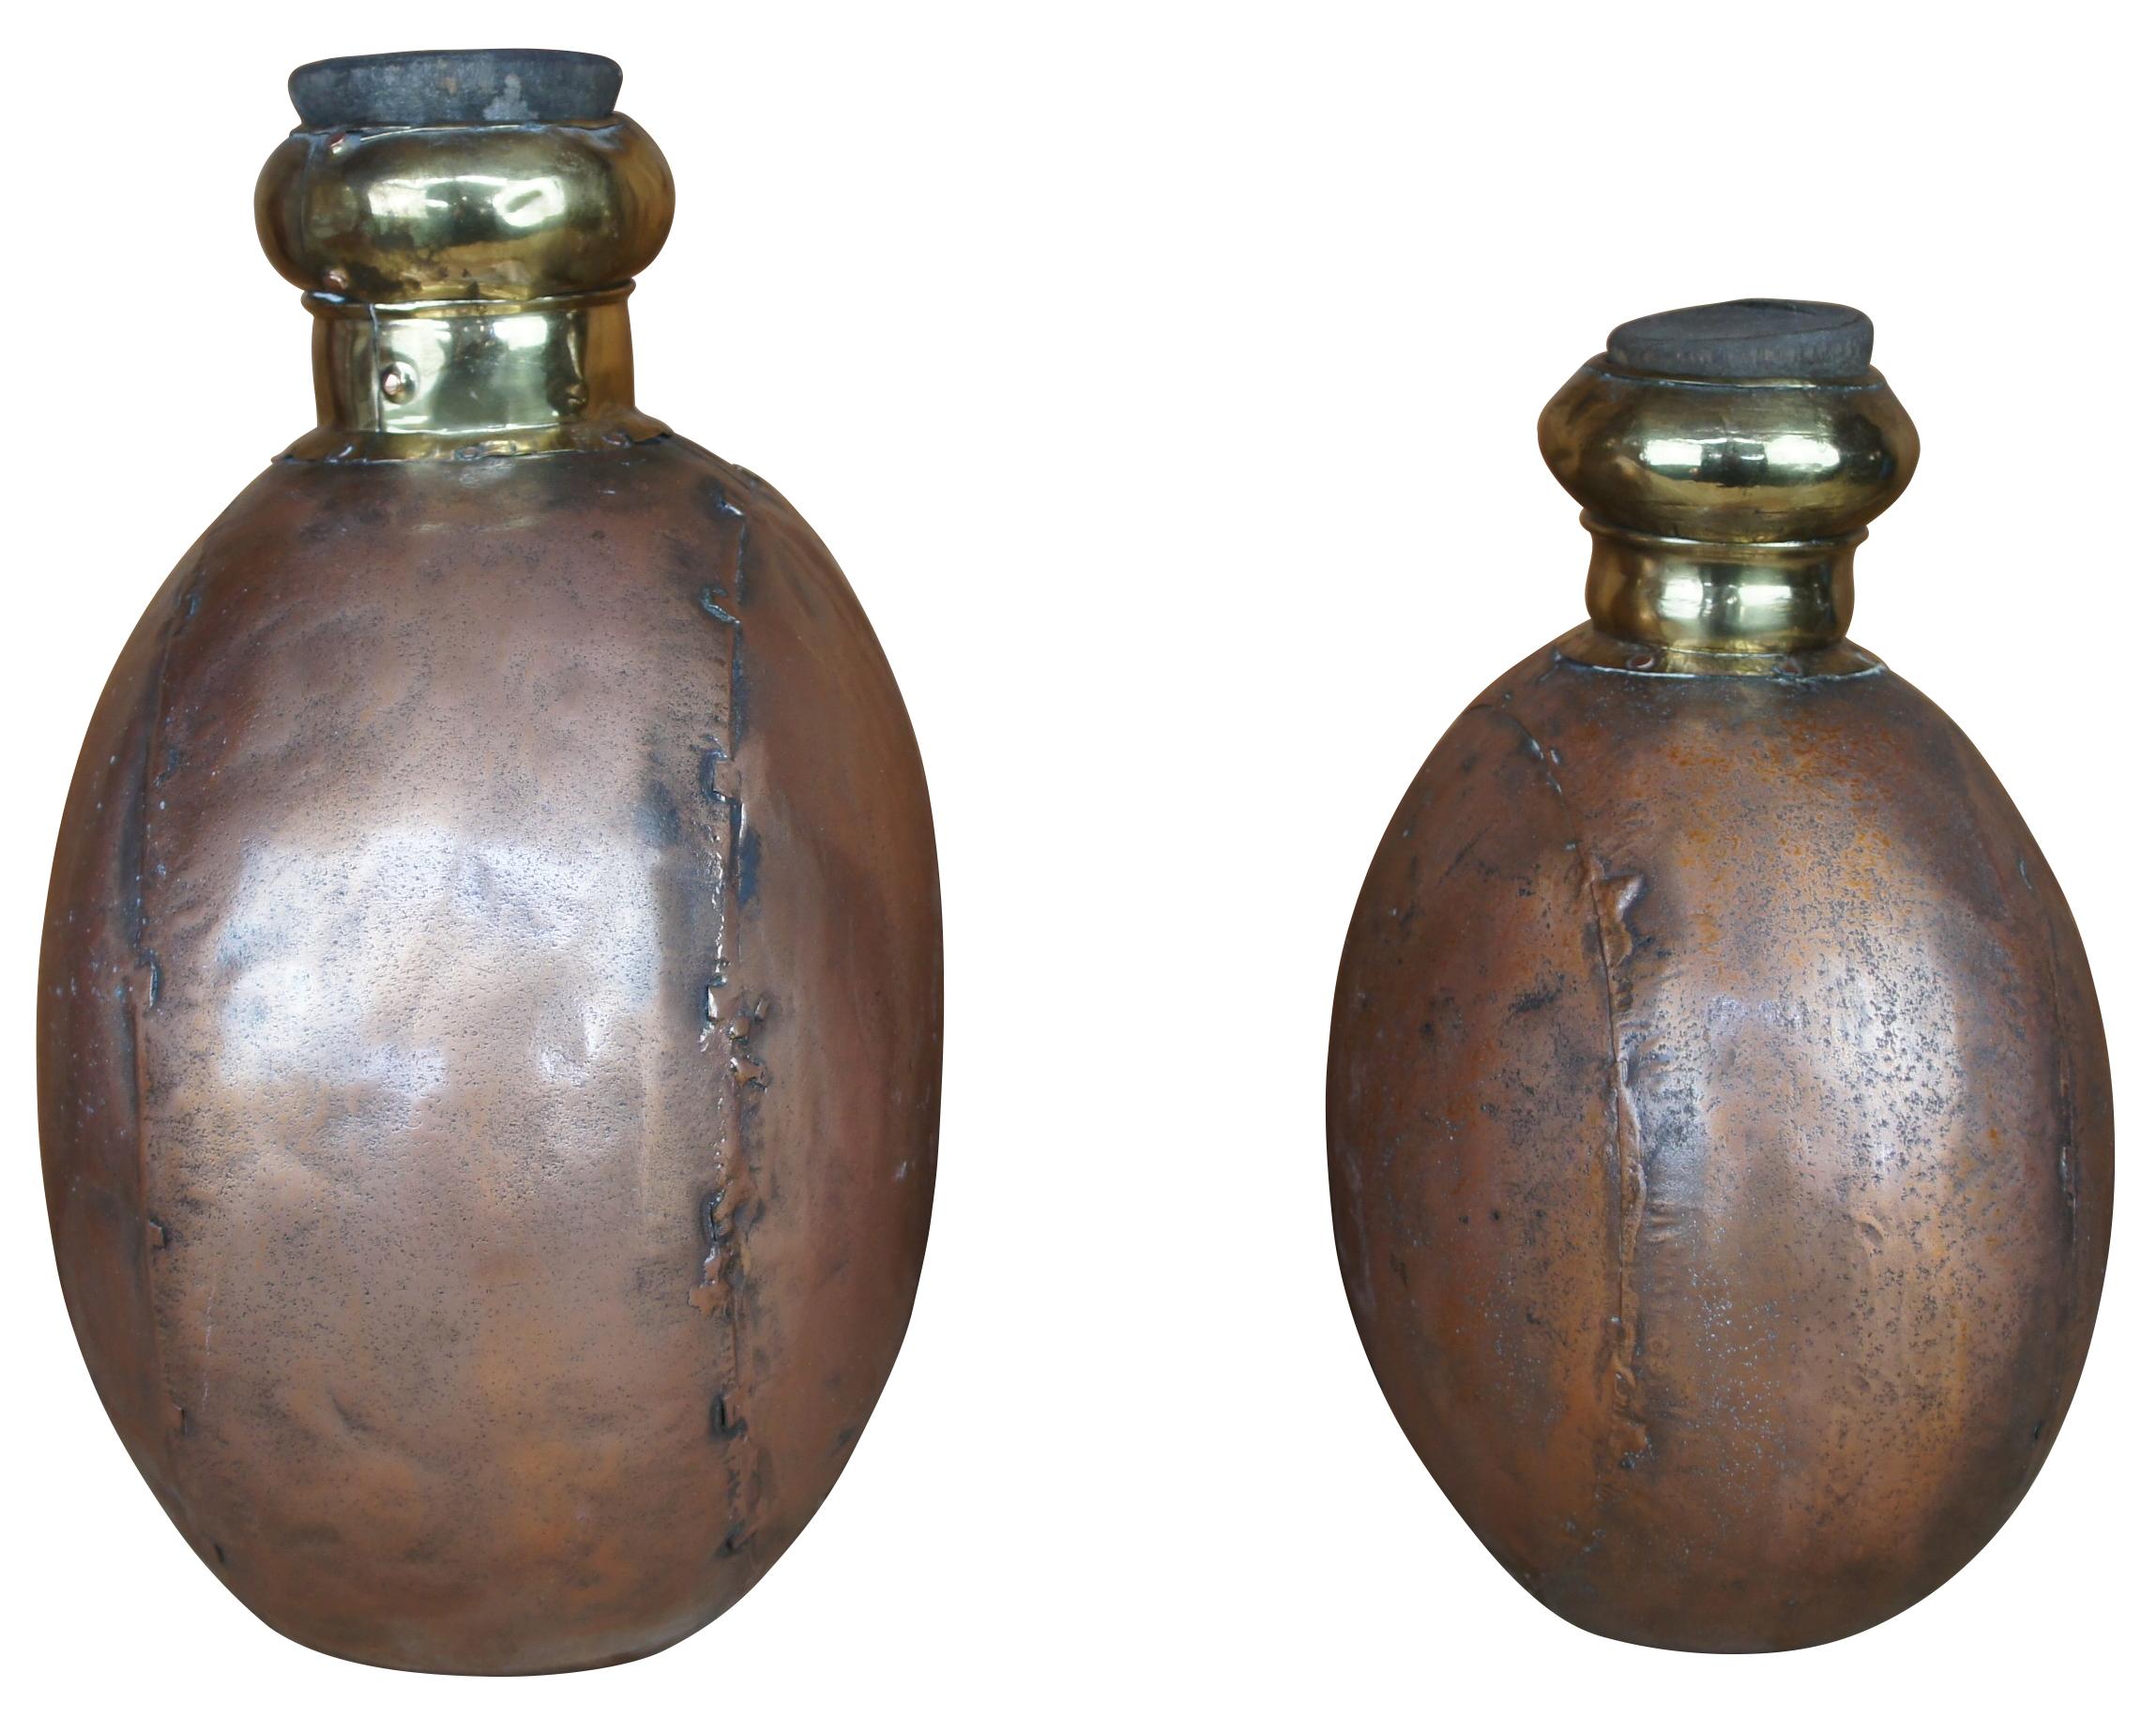 Two large vintage copper canister jugs, bottles or vases featuring cork stopper and dovetailed accents. From India.

Larger - 12